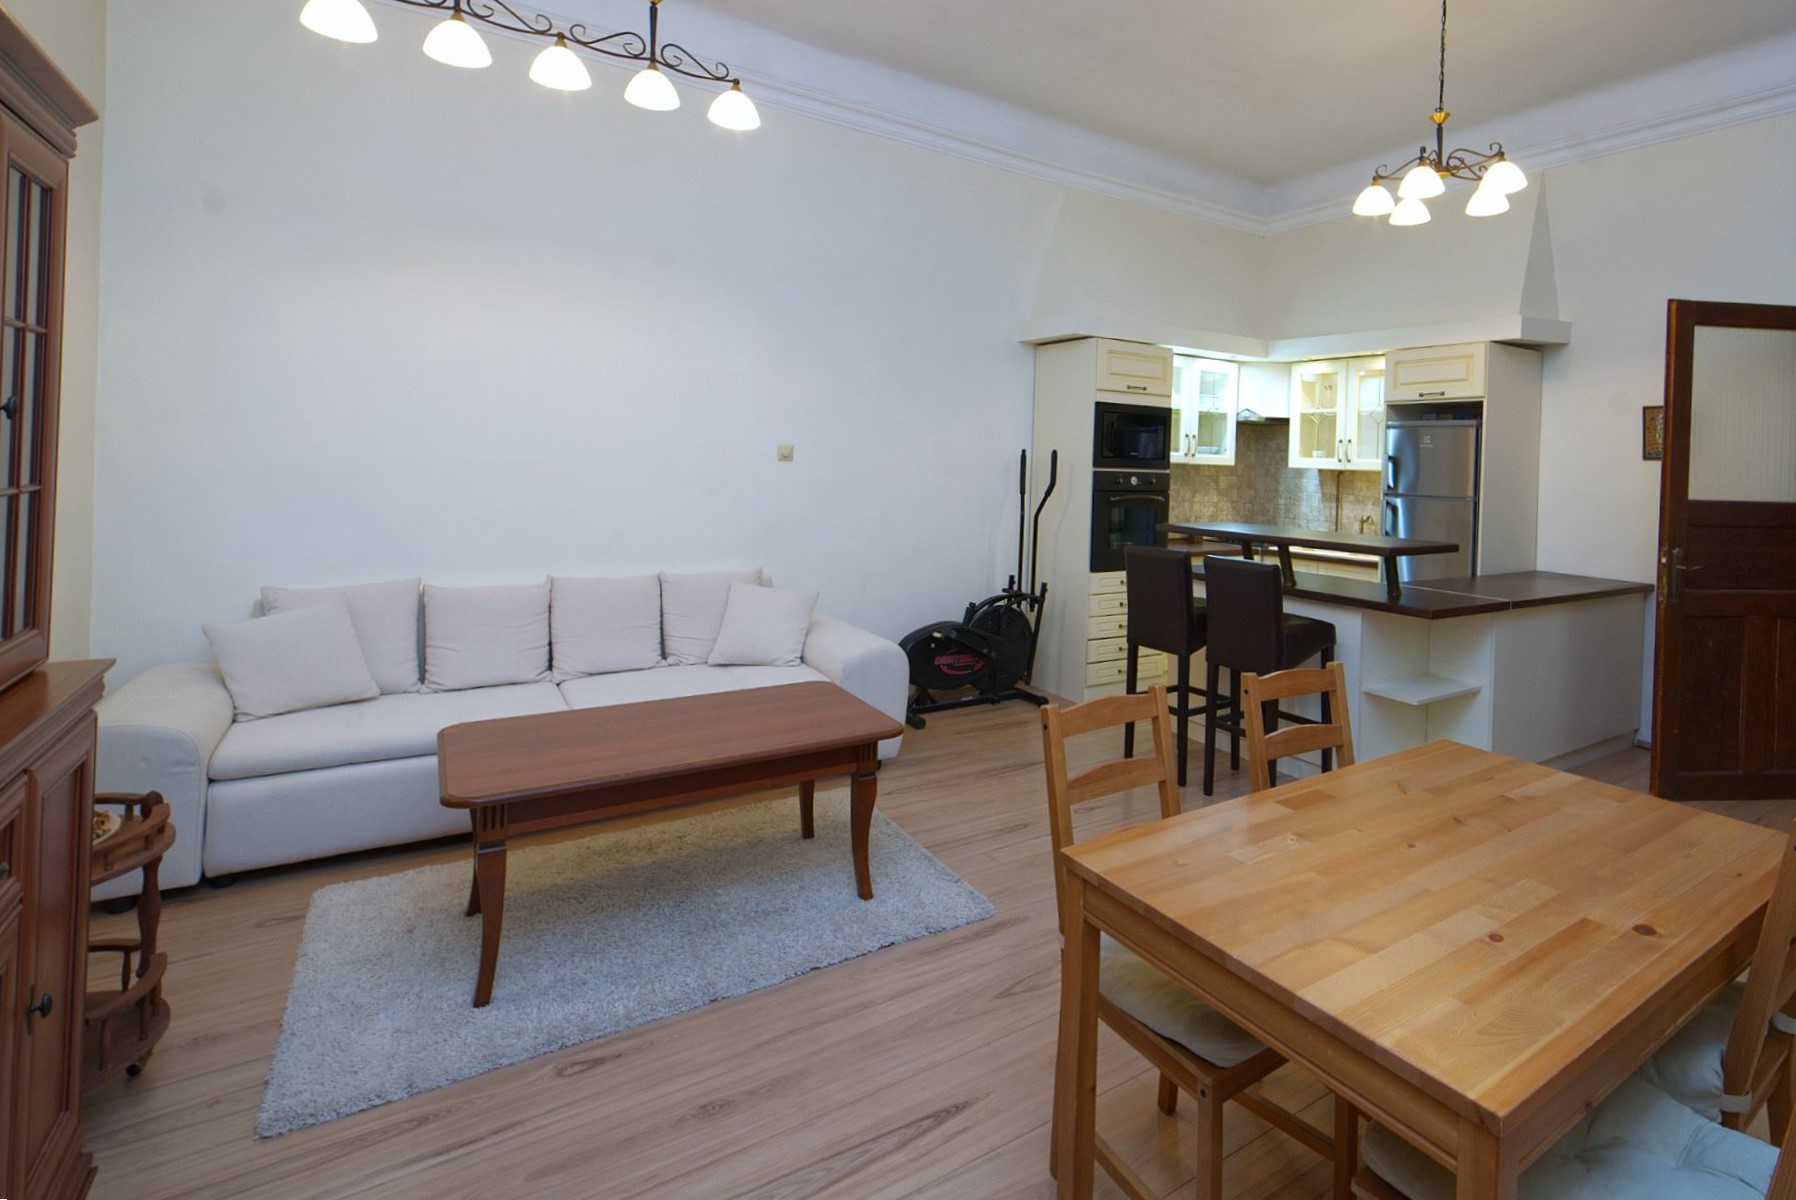 budapestrental-property-for-rent-long-term-spacious-large-1-bedroom-flat-for-rent-district-6-near-nyugati-main-tram12-1